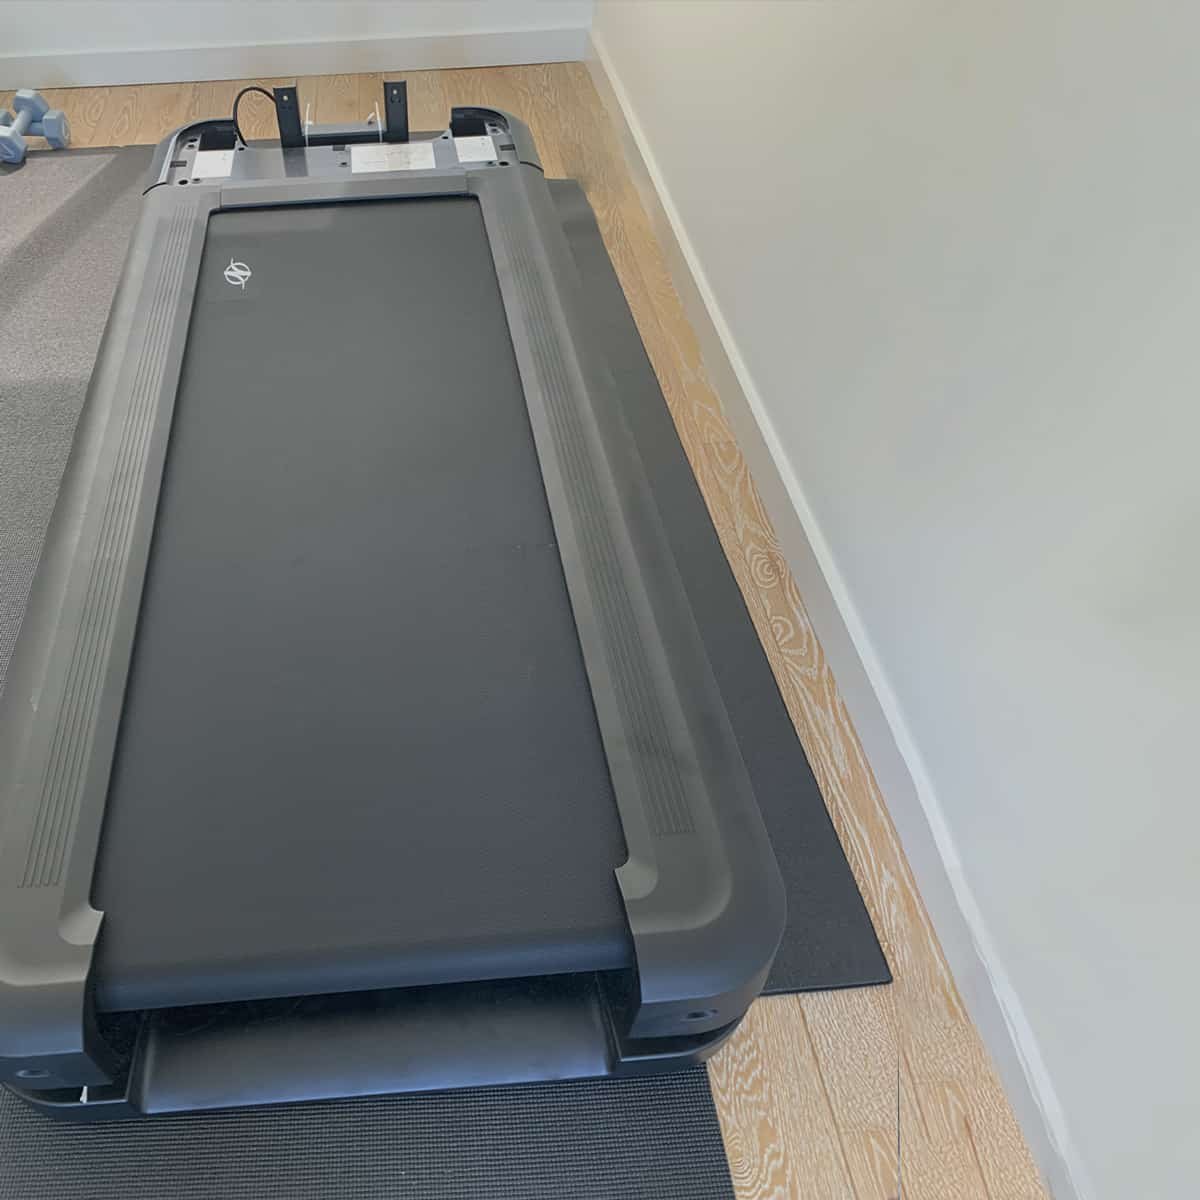 Treadmill 32 base can fit compact space